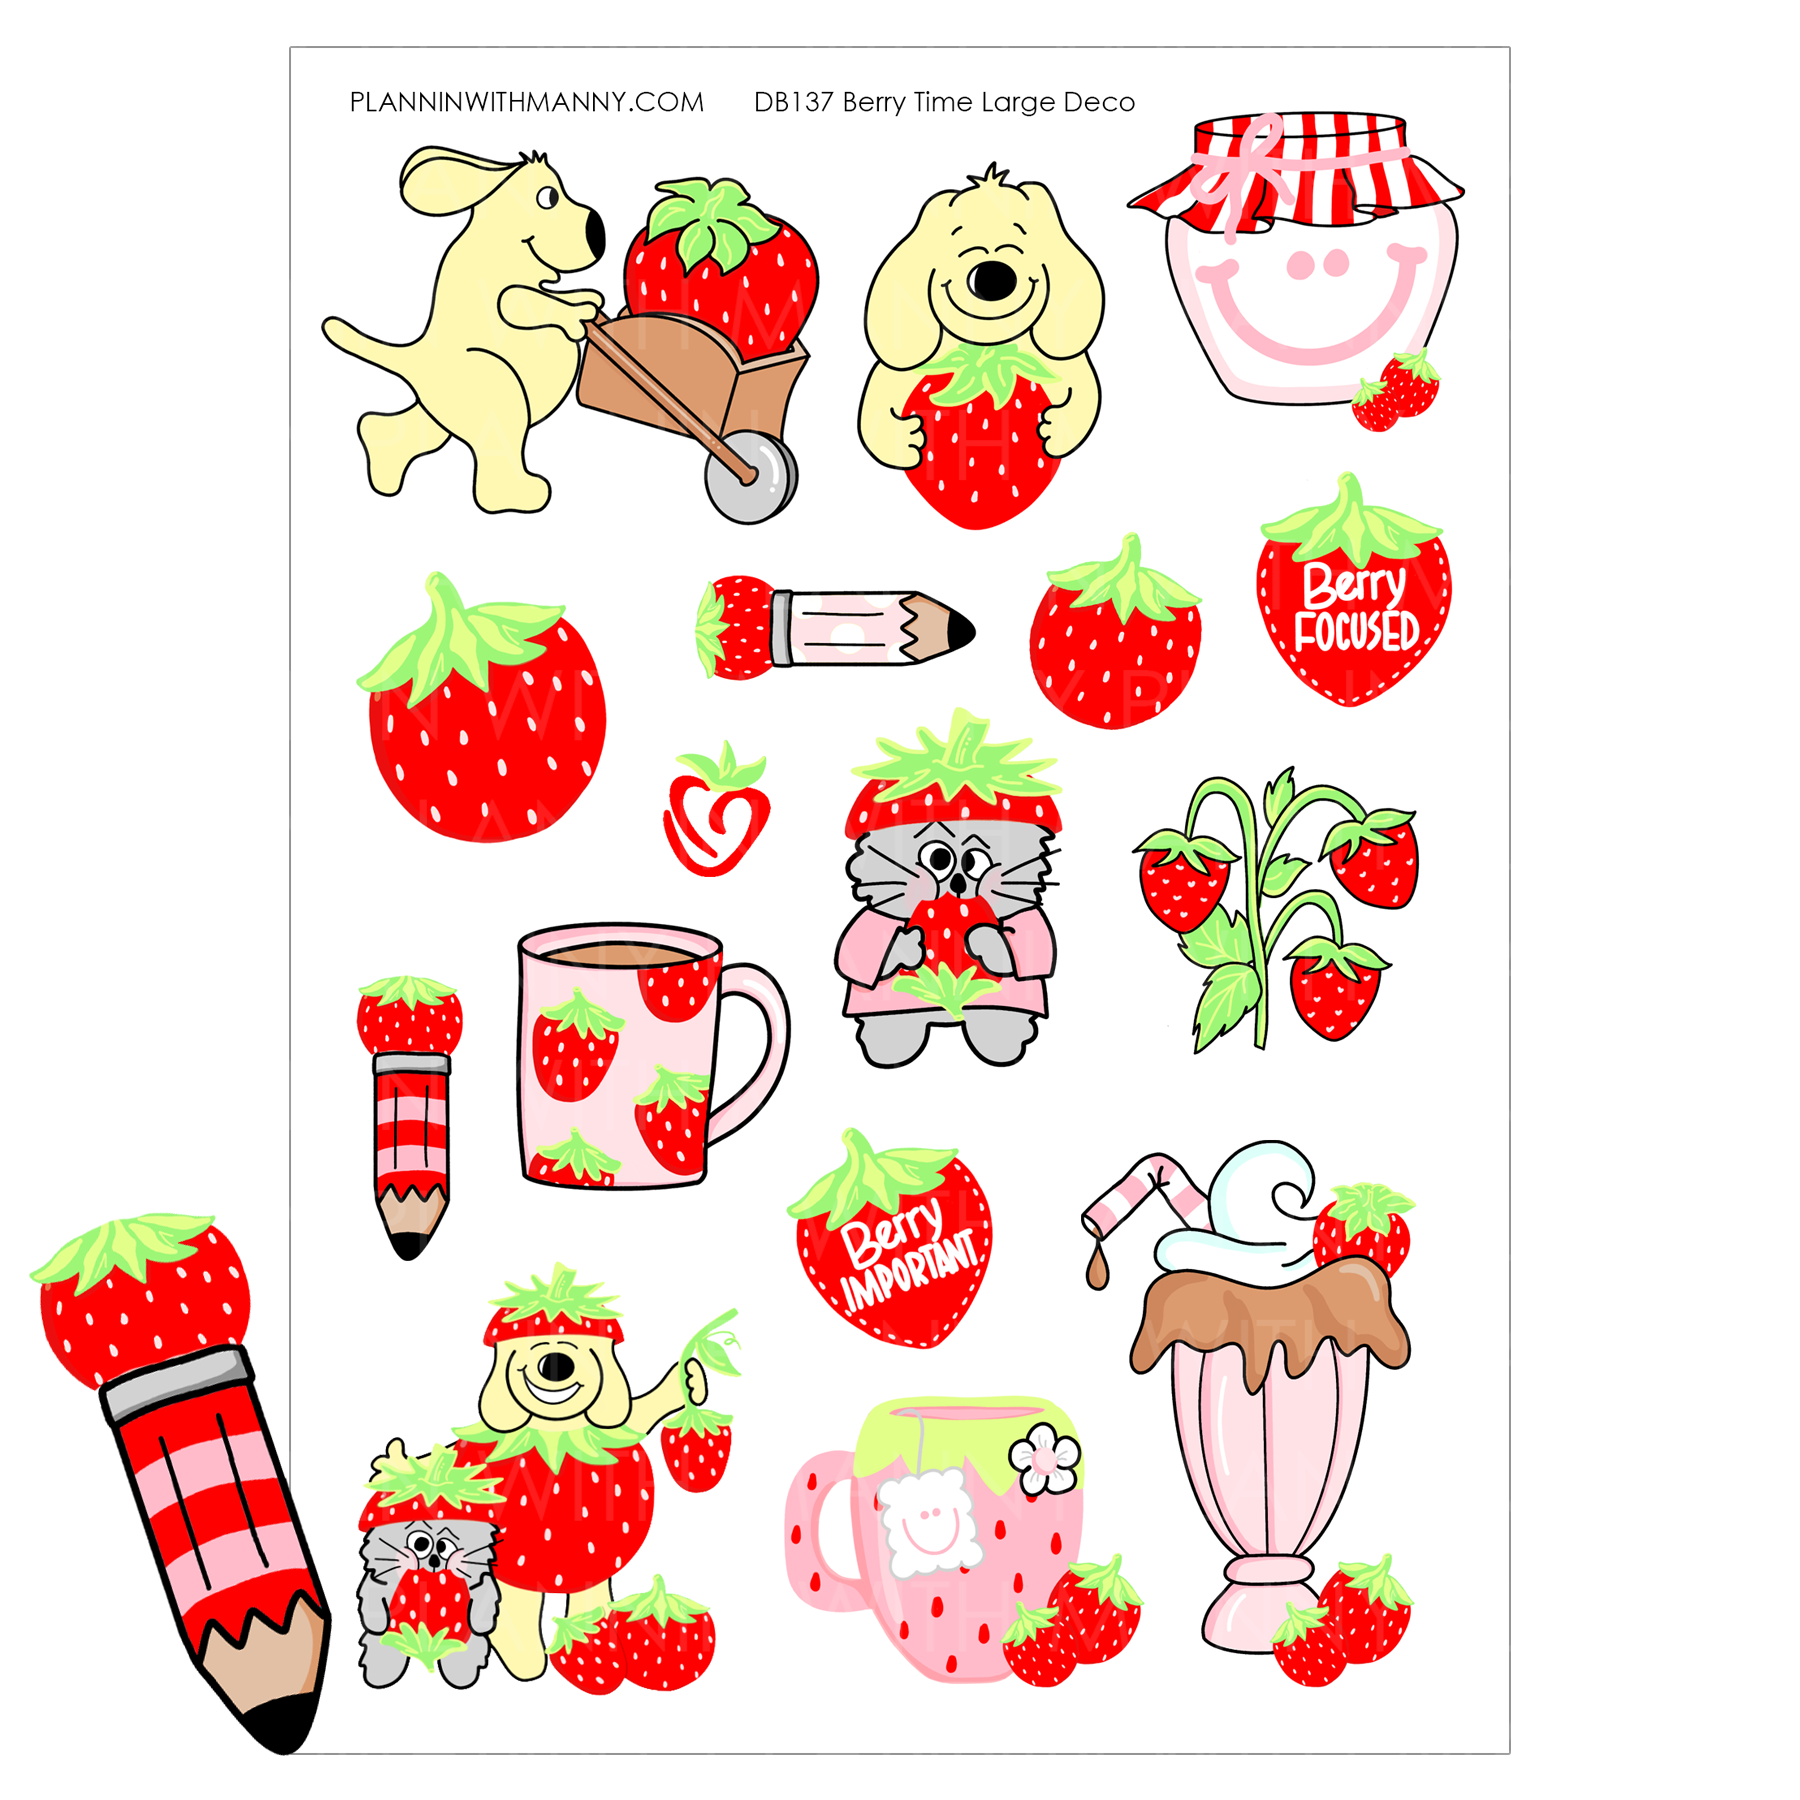 DB137 Berry Time Stickers Large Deco Stickers